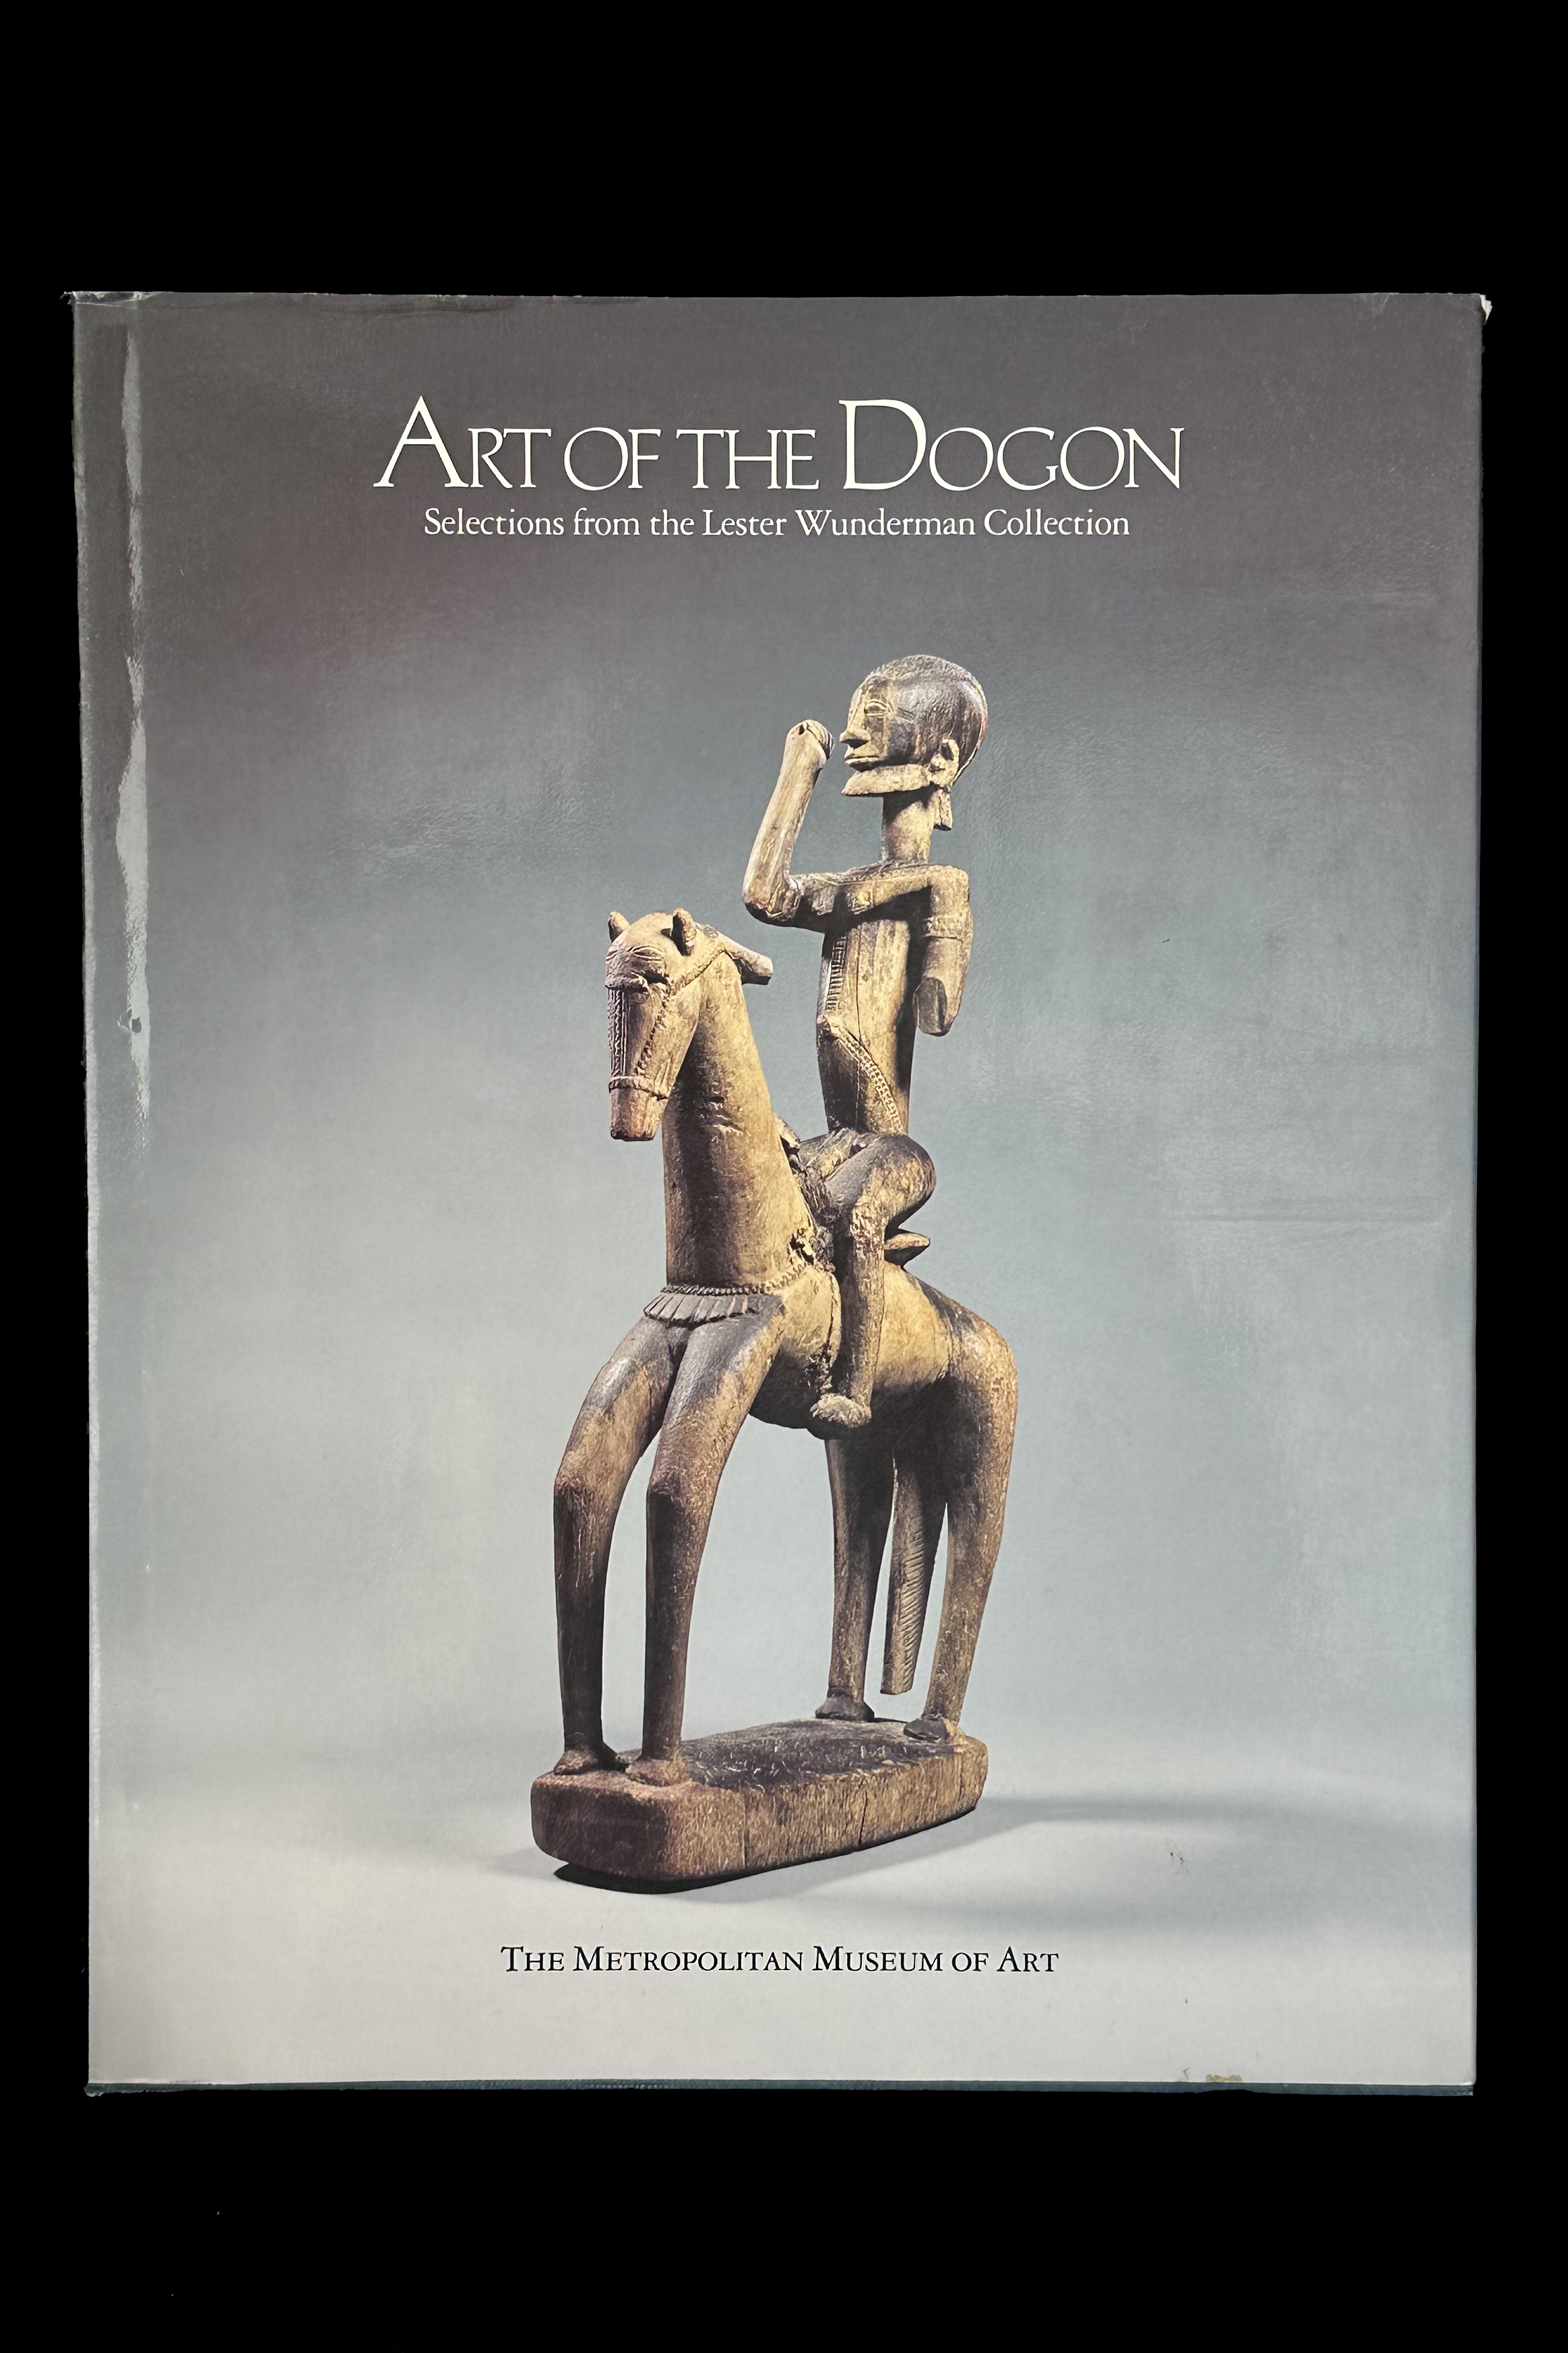 Art of the Dogon - Selections from the Lester Wunderman Collection - The Metropolitan Museum of Art